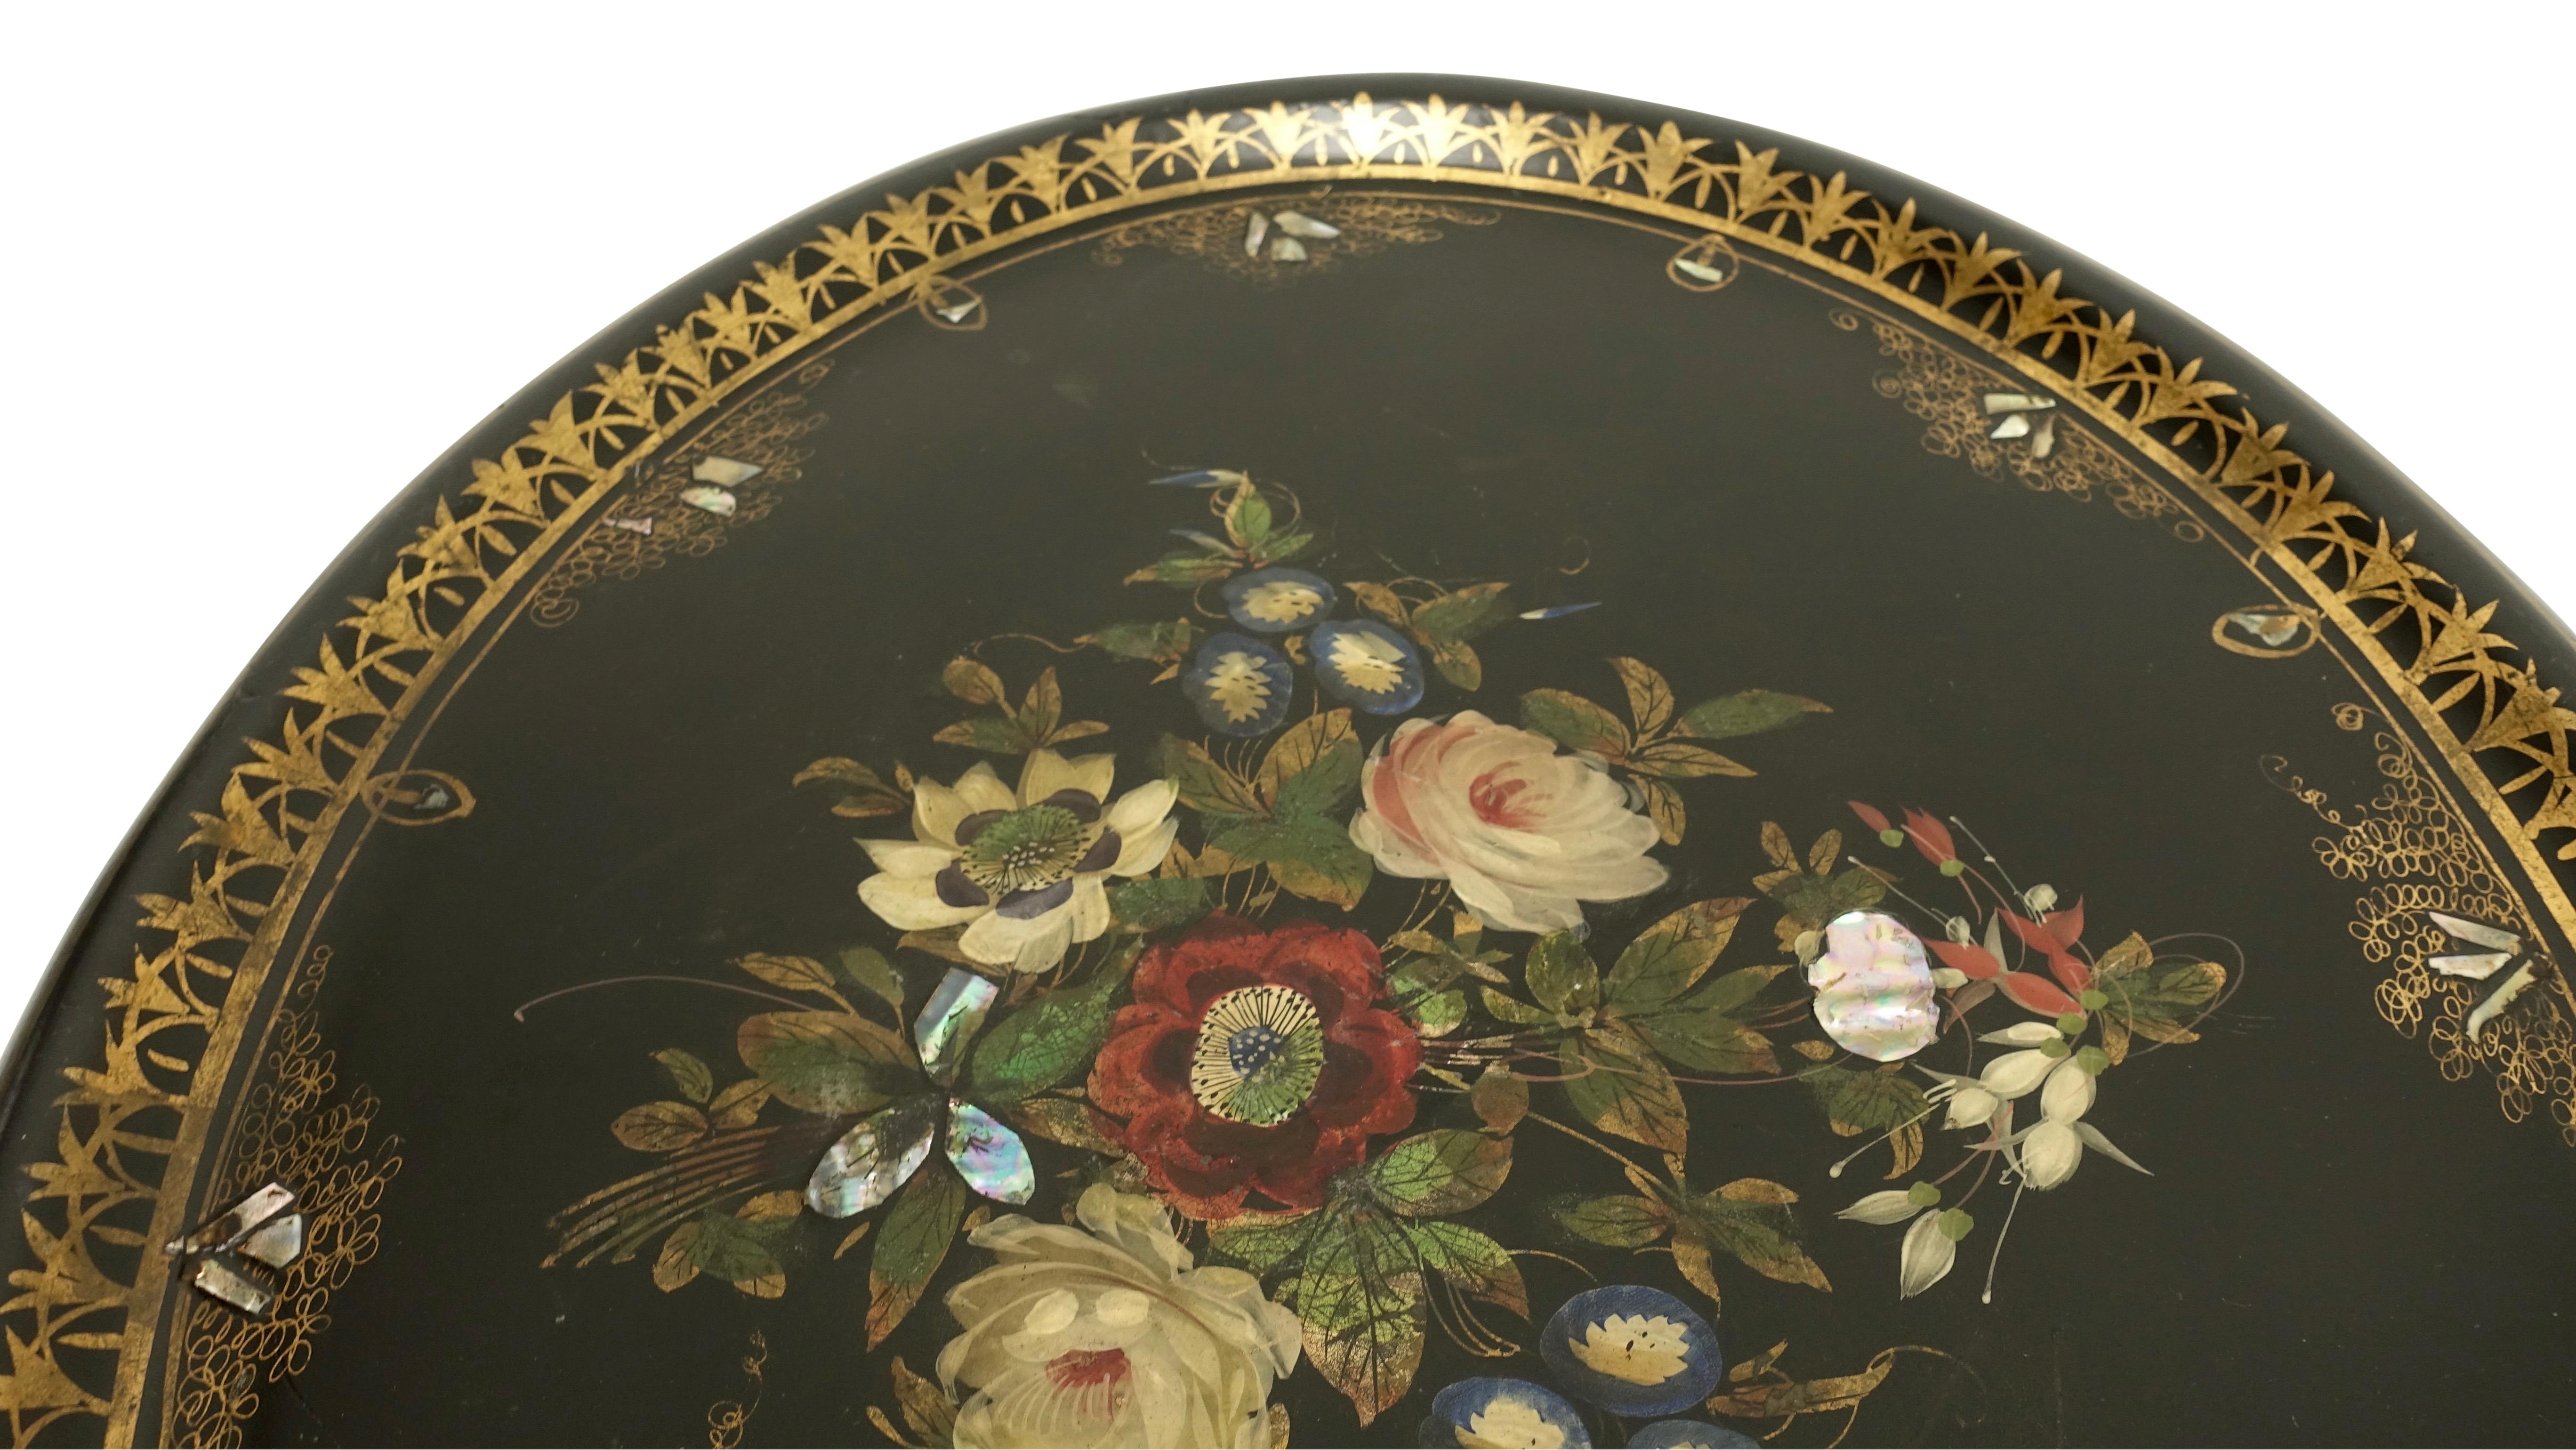 Papier Mâché Hand Painted Tray Table with Mother of Pearl Inlay, 19th Century 1